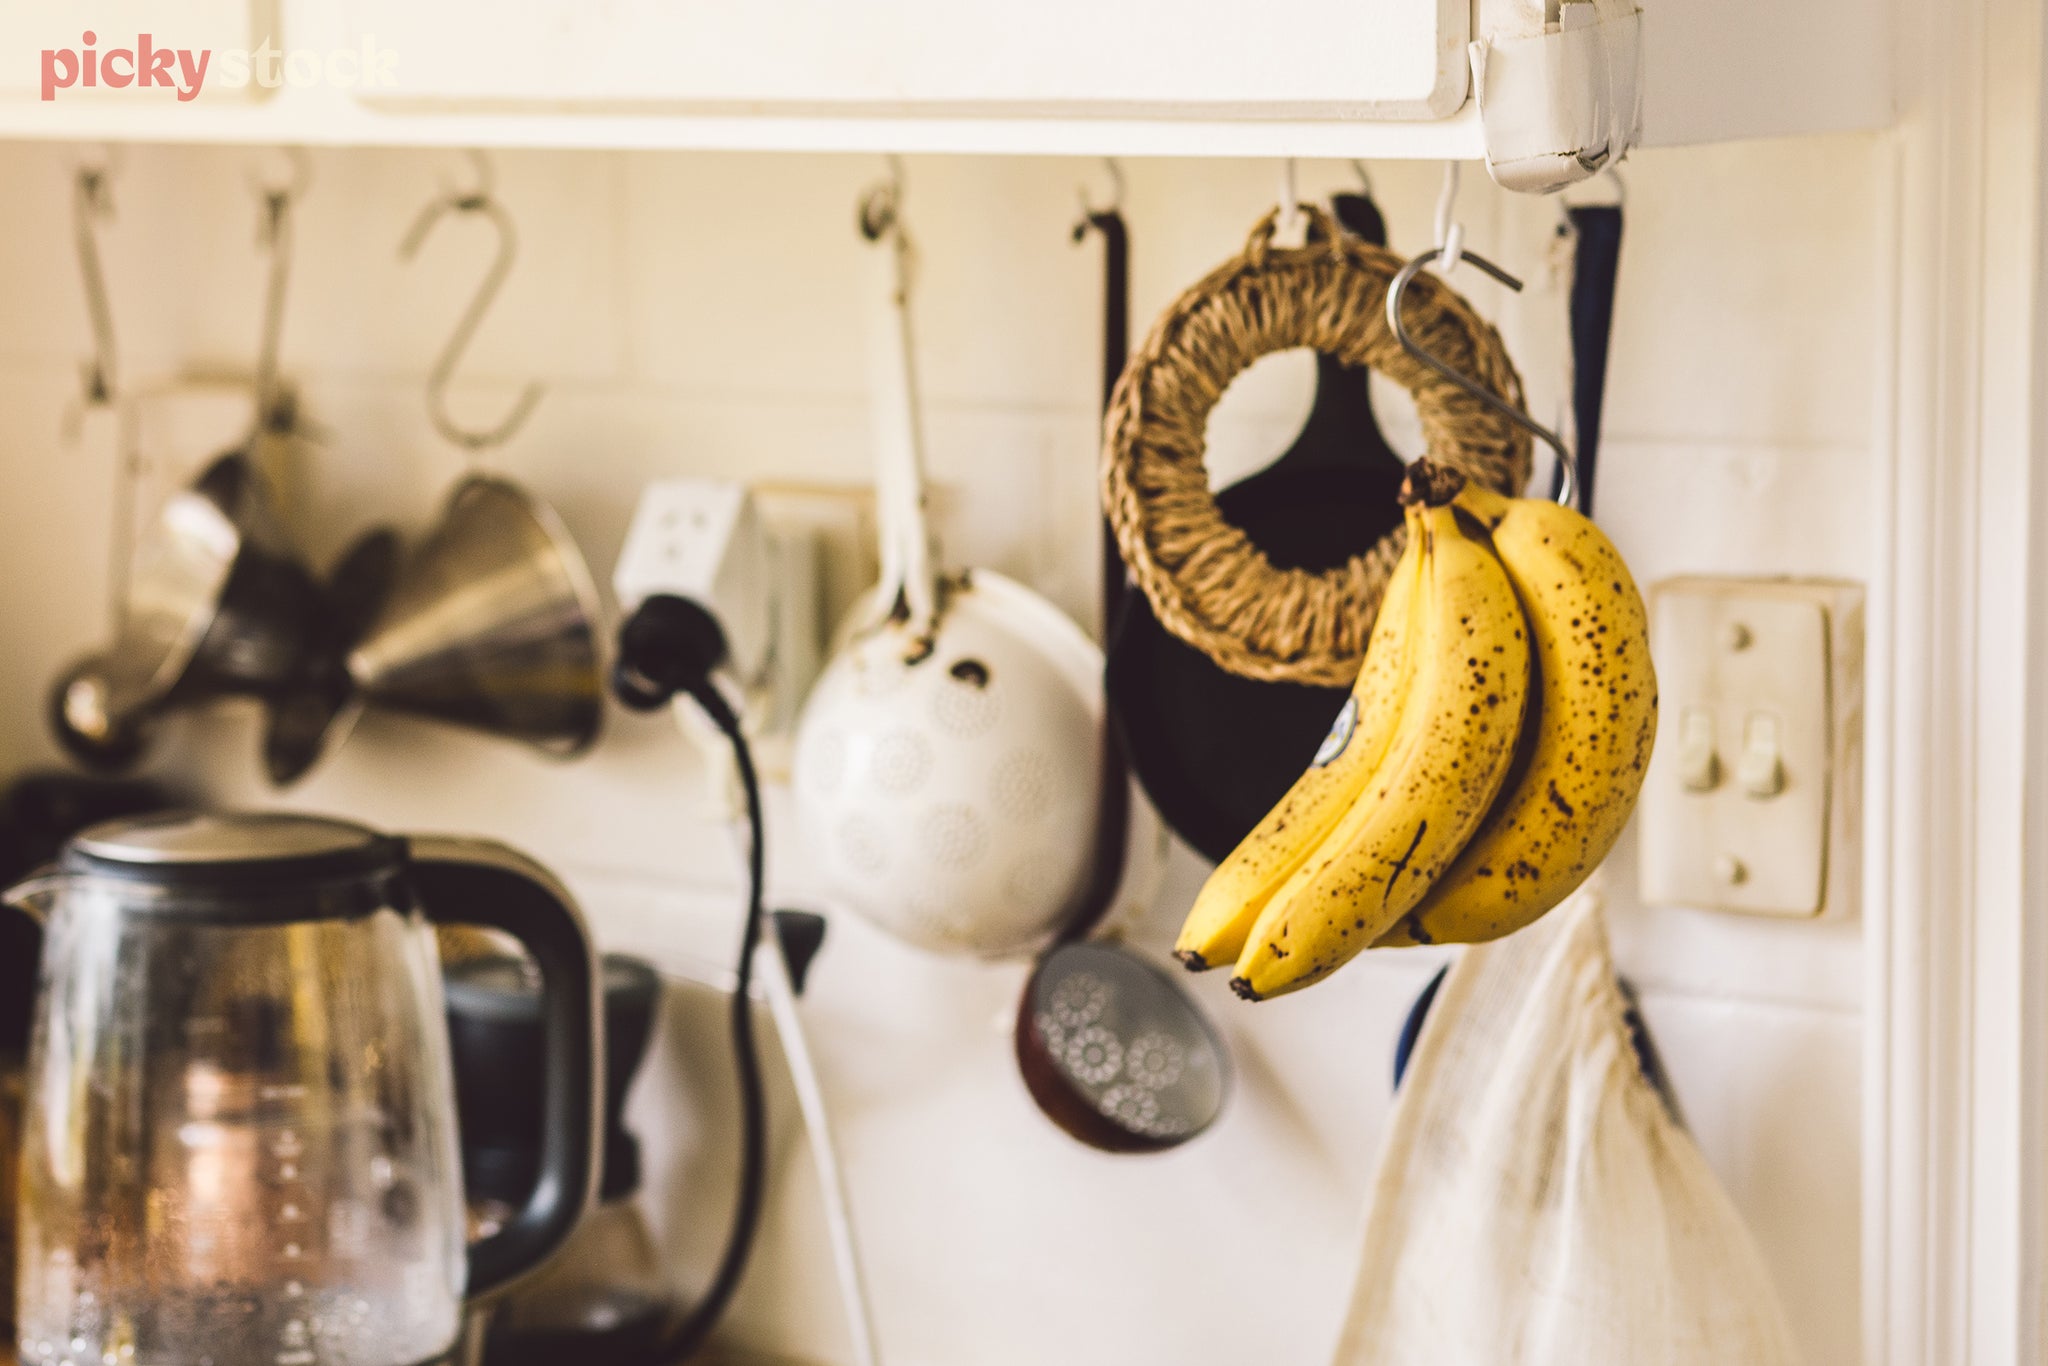 Nearly-over-ripe bananas hang in an Auckland kitchen, doused in sunlight. 